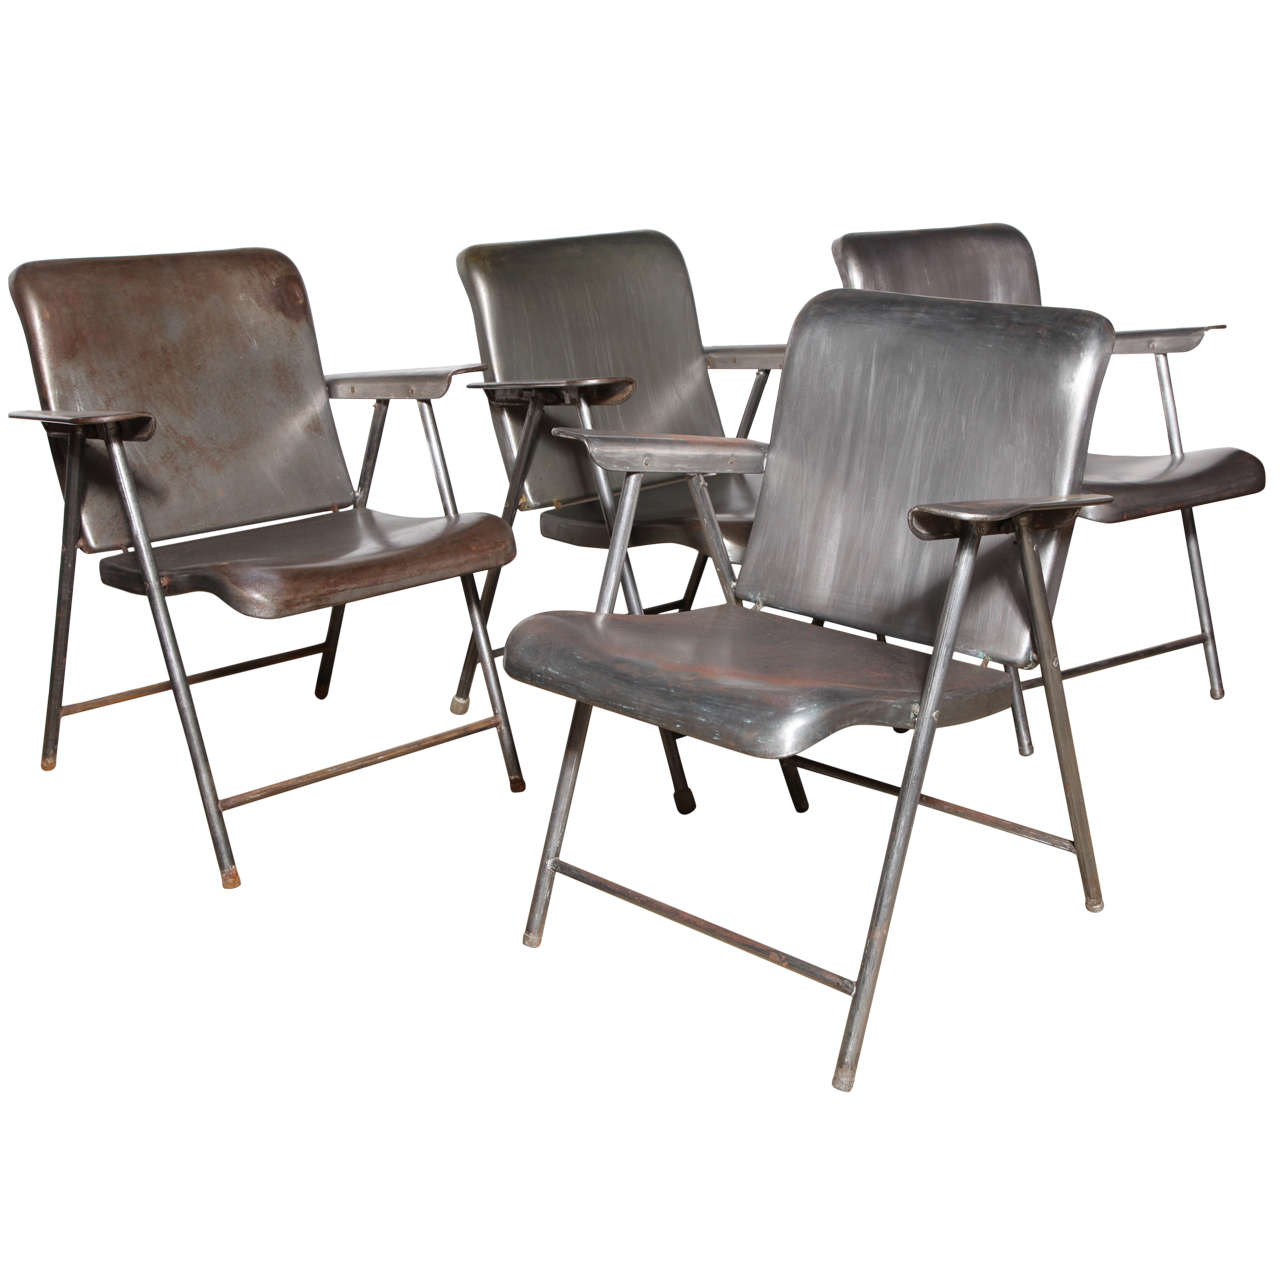 Set Of Four Russel Wright Folding Steel Arm Chairs Late 1940 S